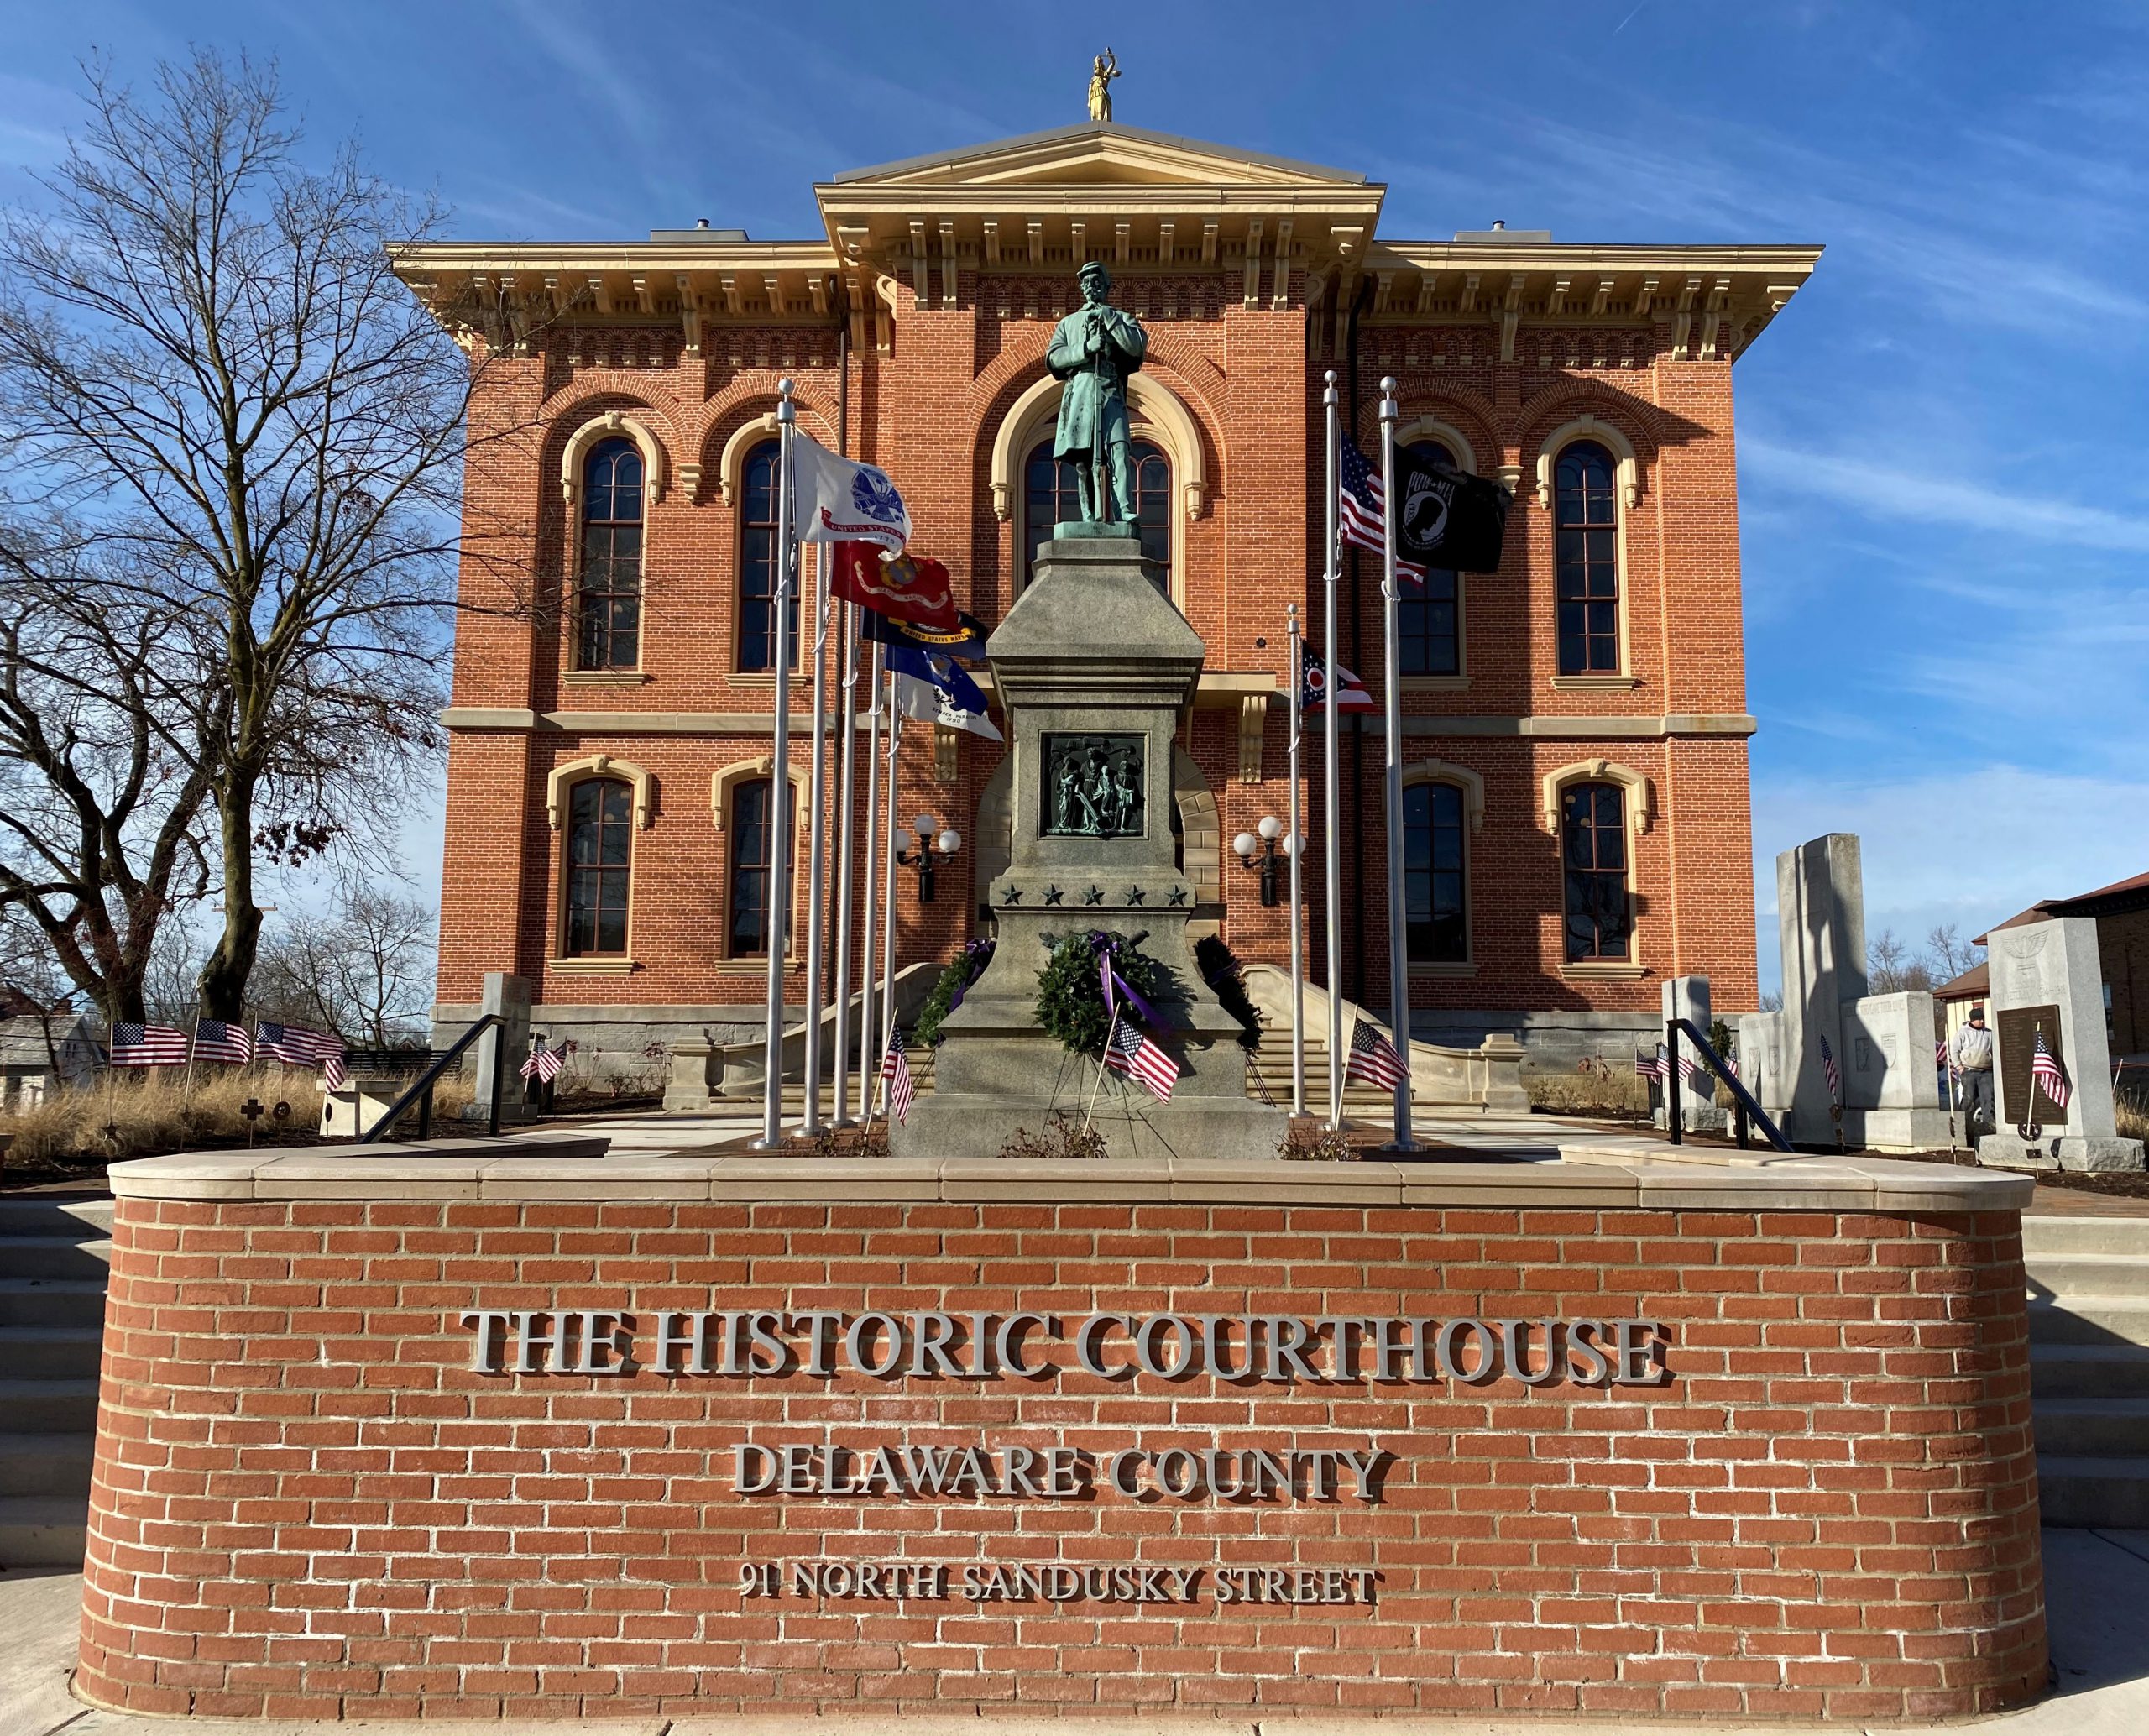 Commissioners move into The Historic Courthouse Delaware County